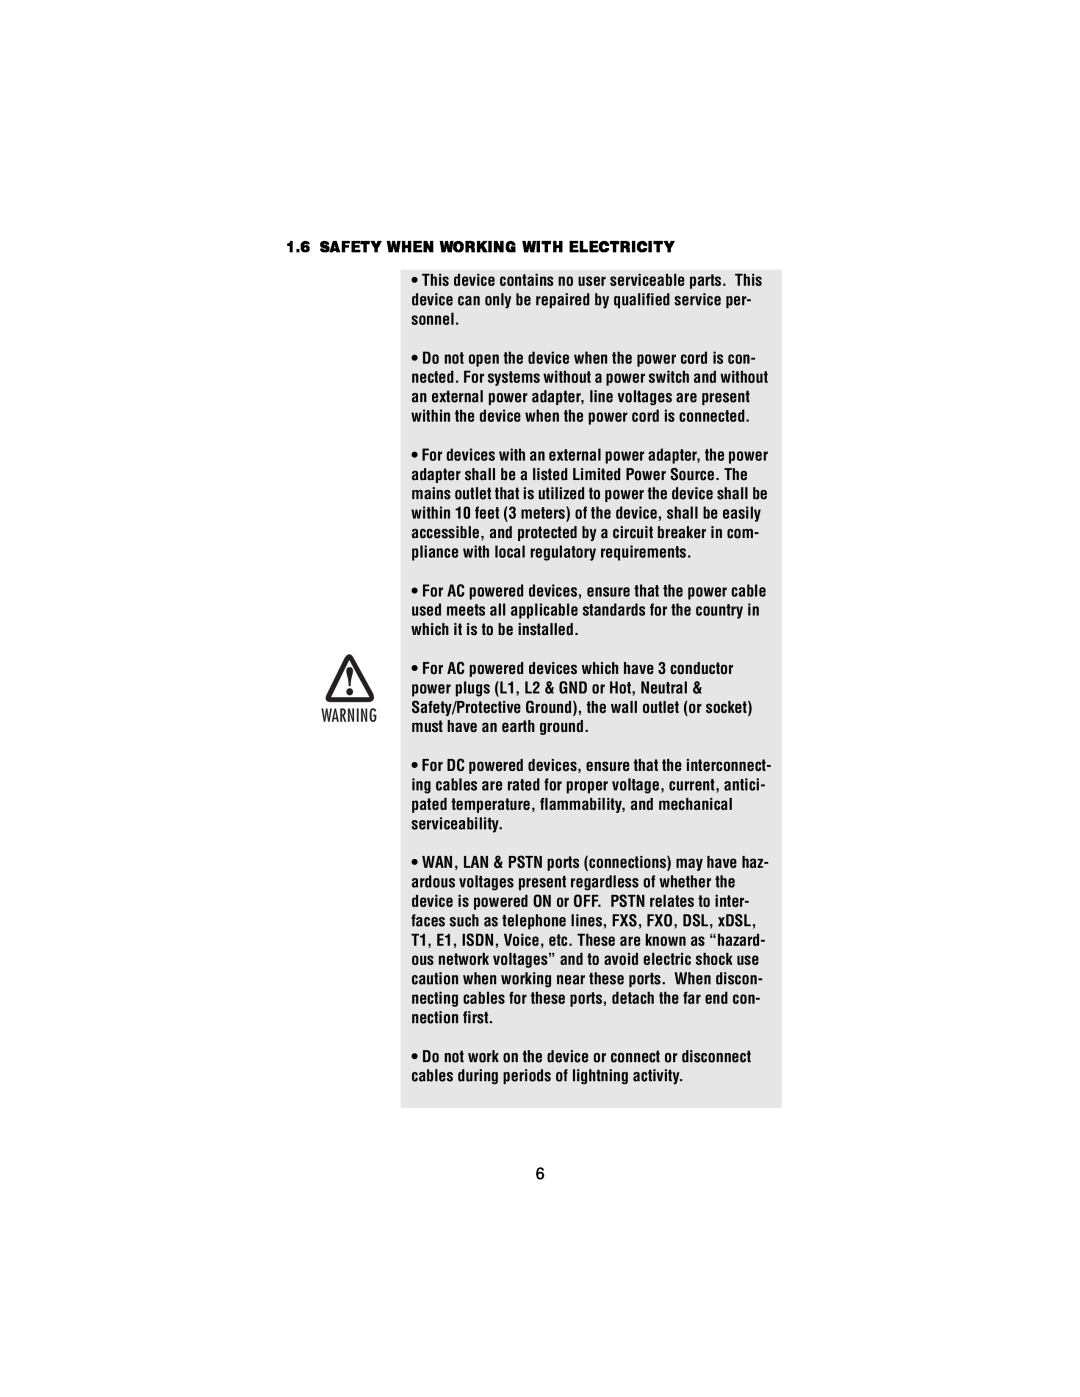 Patton electronic 2151 user manual Safety When Working With Electricity, For AC powered devices which have 3 conductor 